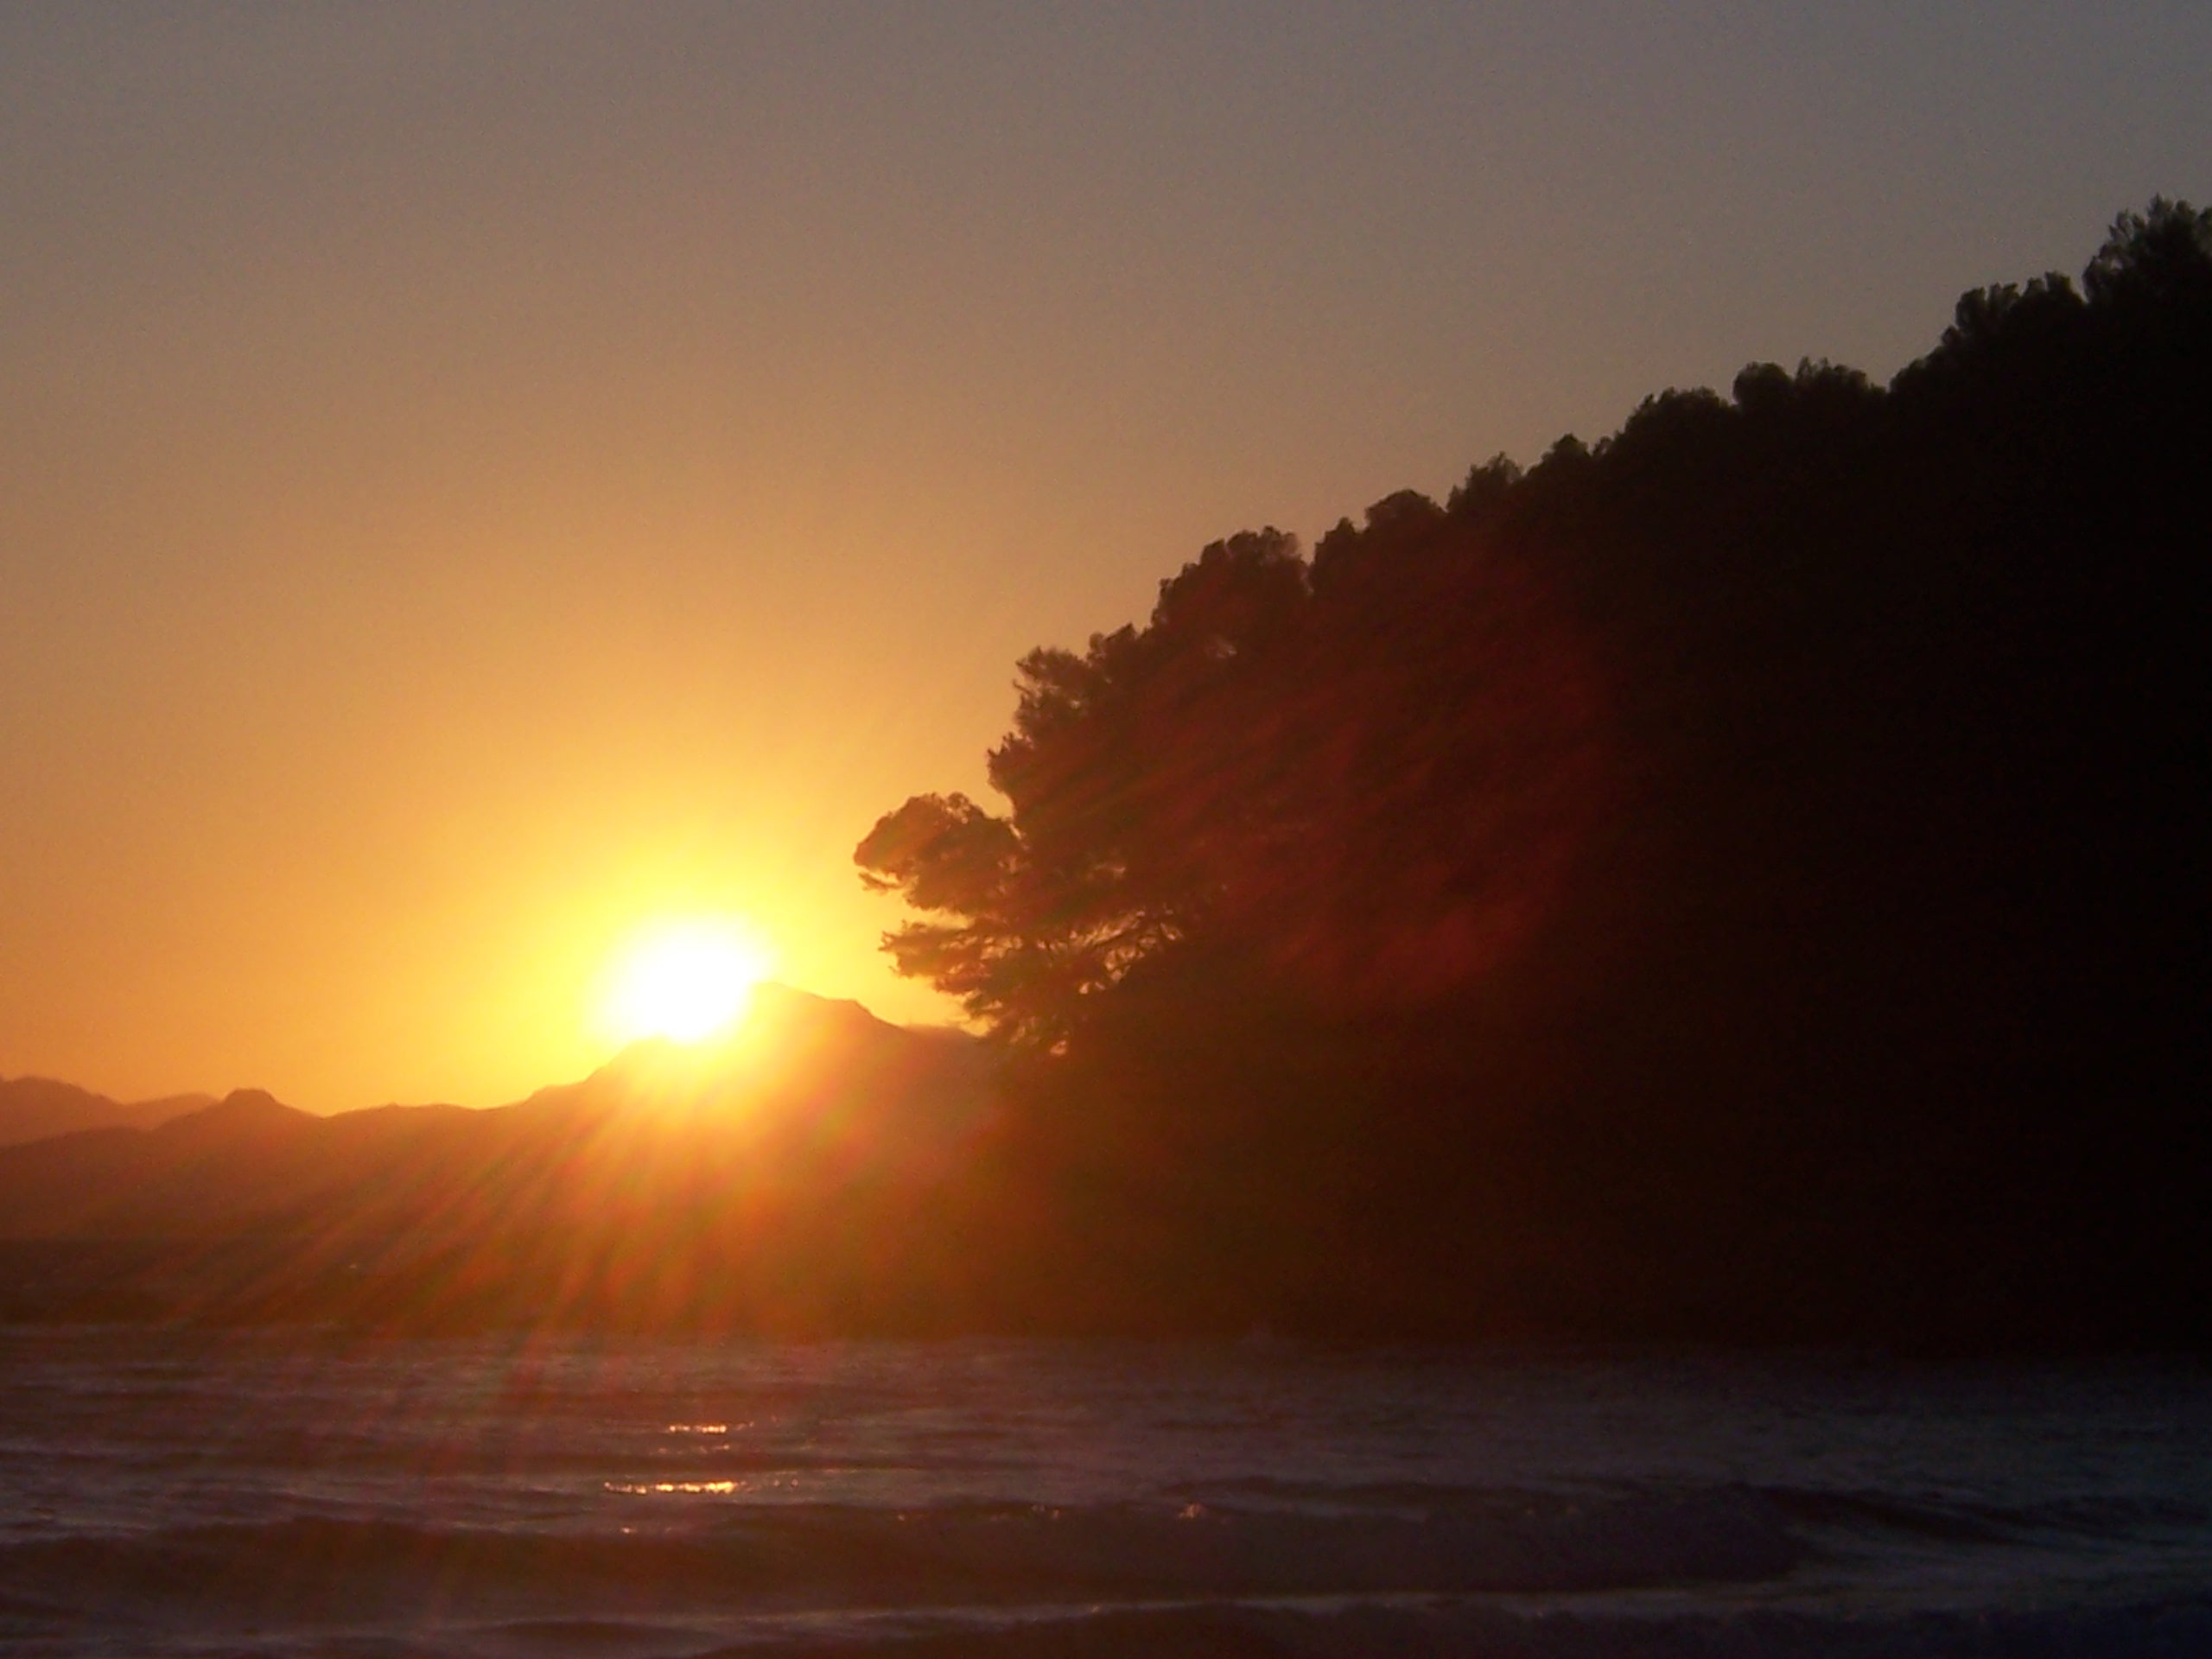 Sunset and the beaches of Toulon on the Mediterranean Sea